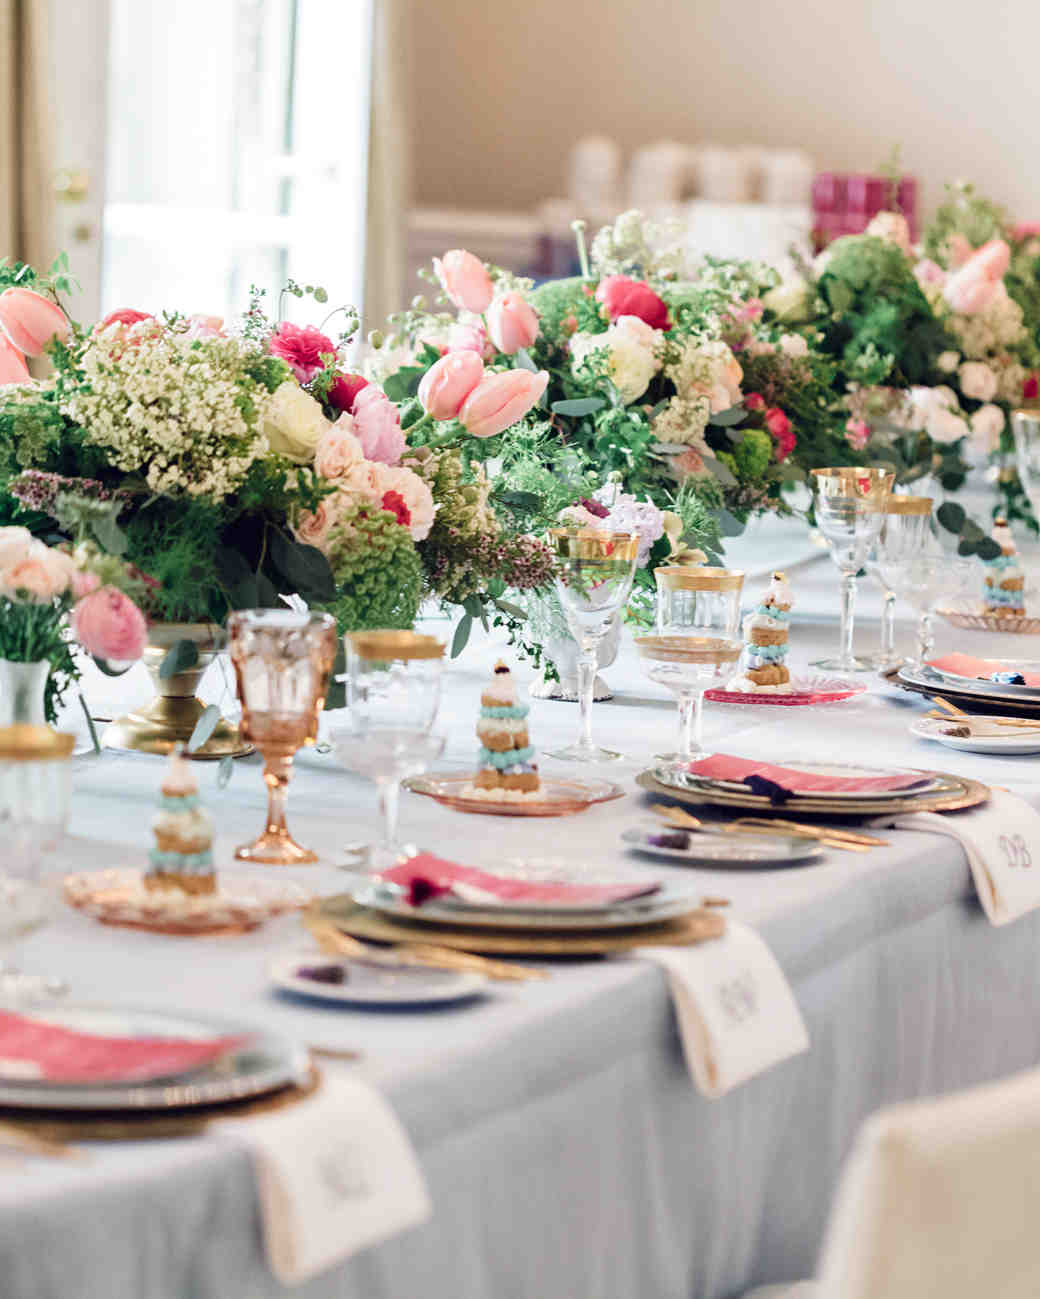 Your Ultimate Bridal Shower Checklist for Celebrating the Bride-to-Be